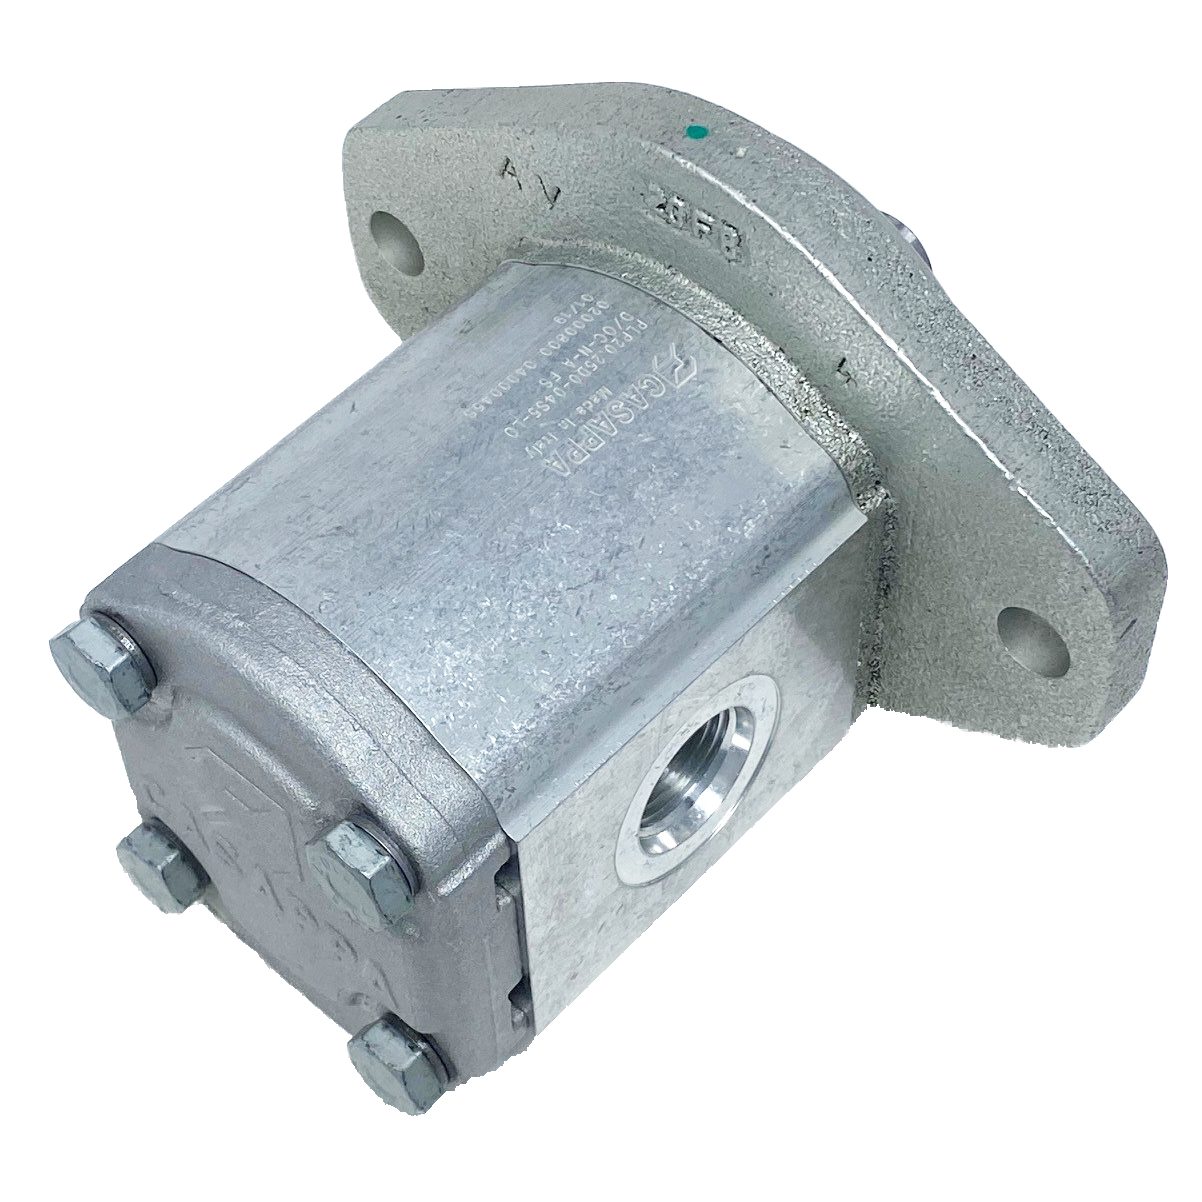 PHM20.25R0-32S5-LOC/OG-N-L : Casappa Polaris Gear Motor, 26.42cc, 3335psi, 3000RPM, Reversible, External Drain, 3/4" Bore x 1/4" Key Shaft, SAE B 2-Bolt Flange, 0.625 (5/8") #10 SAE In, 1.25" #20 SAE Out, Cast Iron Body Cast Iron Flange And Cover